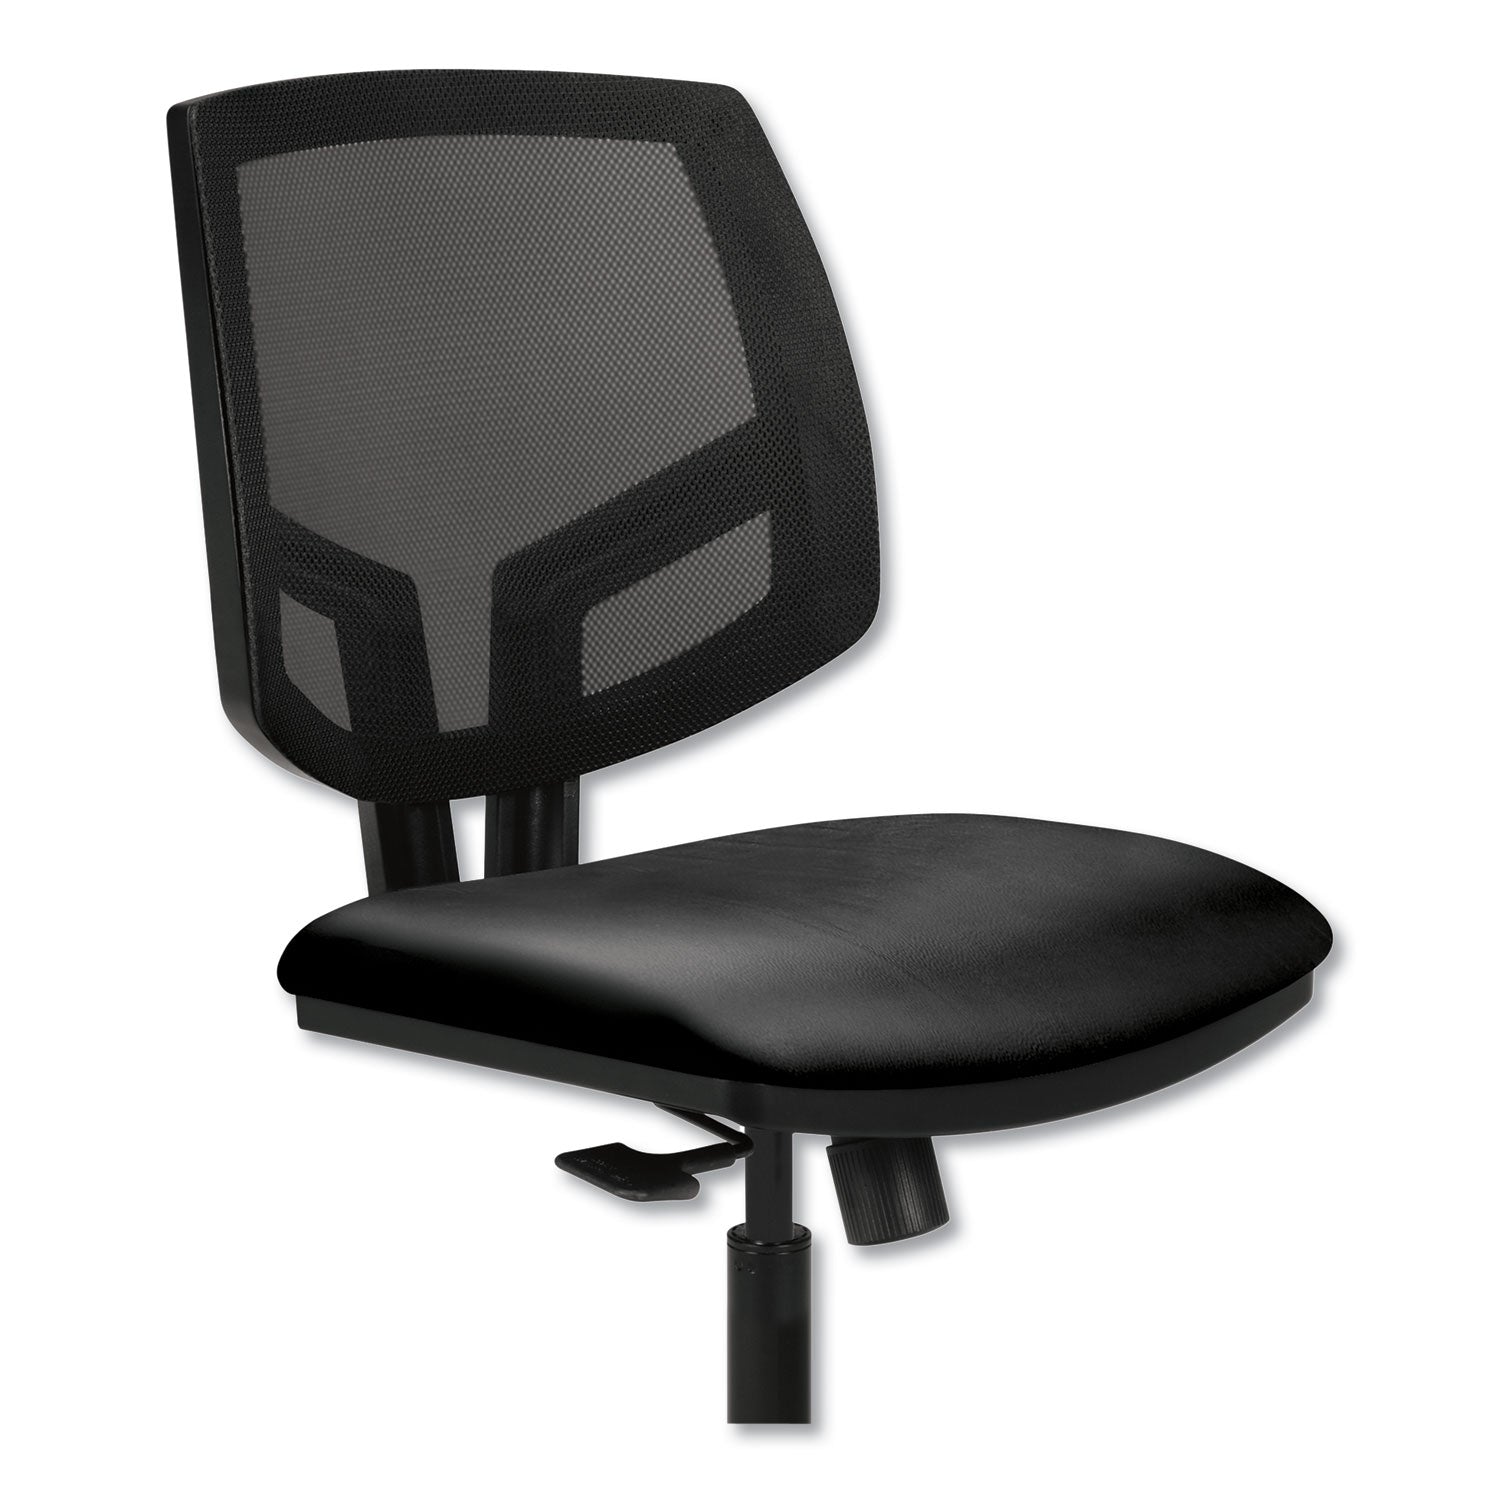 Volt Series Mesh Back Task Chair, Supports Up to 250 lb, 18.25" to 22.38" Seat Height, Black - 